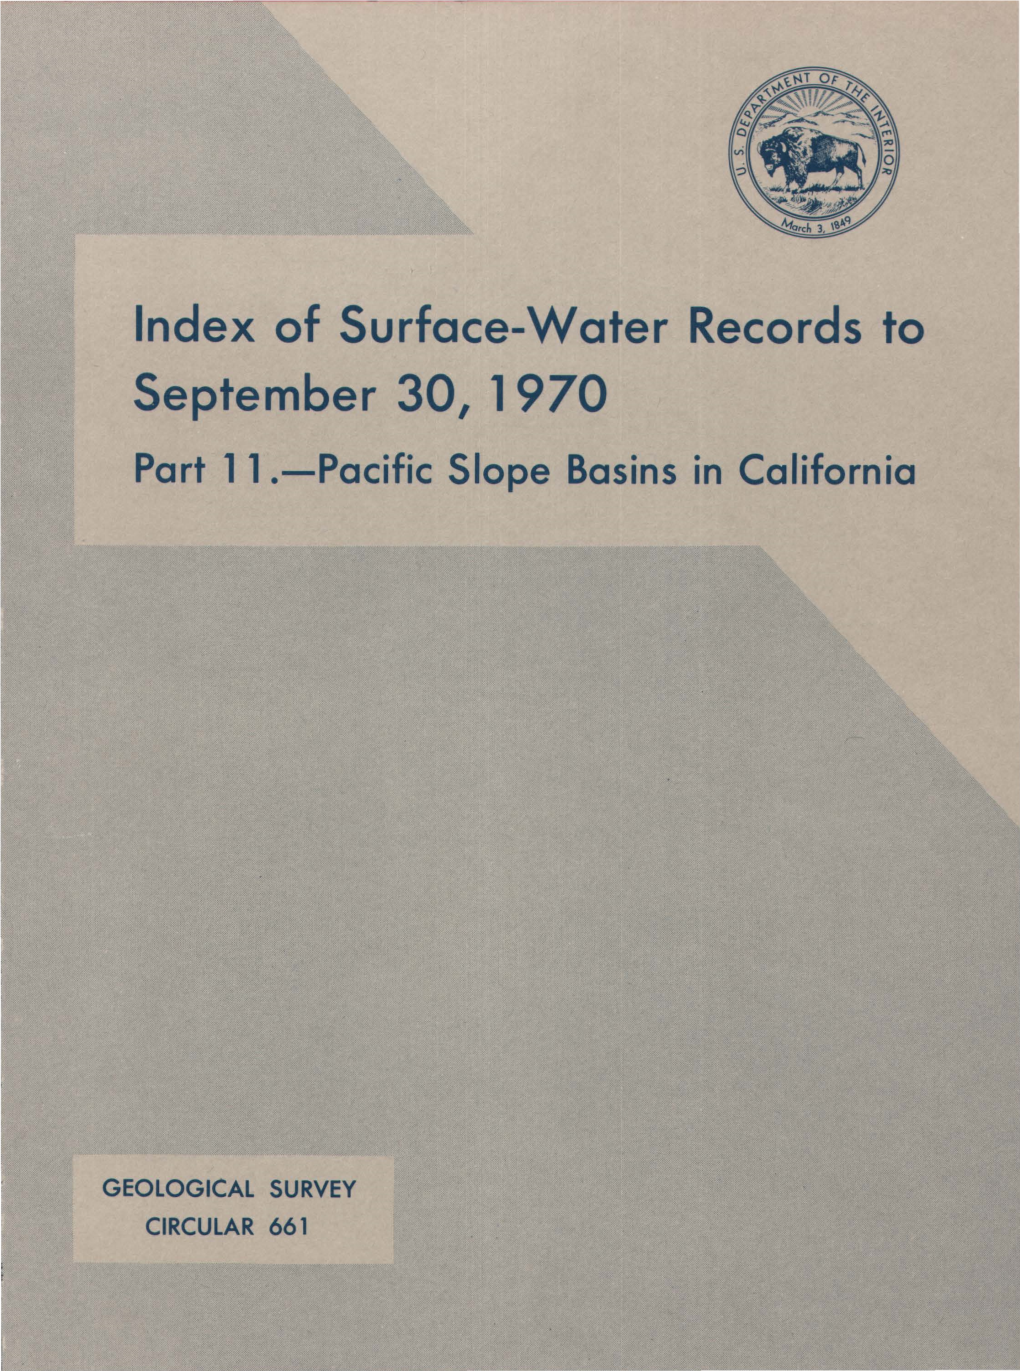 Index of Surface-Water Records to September 30, 1 970 Part 11 .-Pacific Slope Basins in California